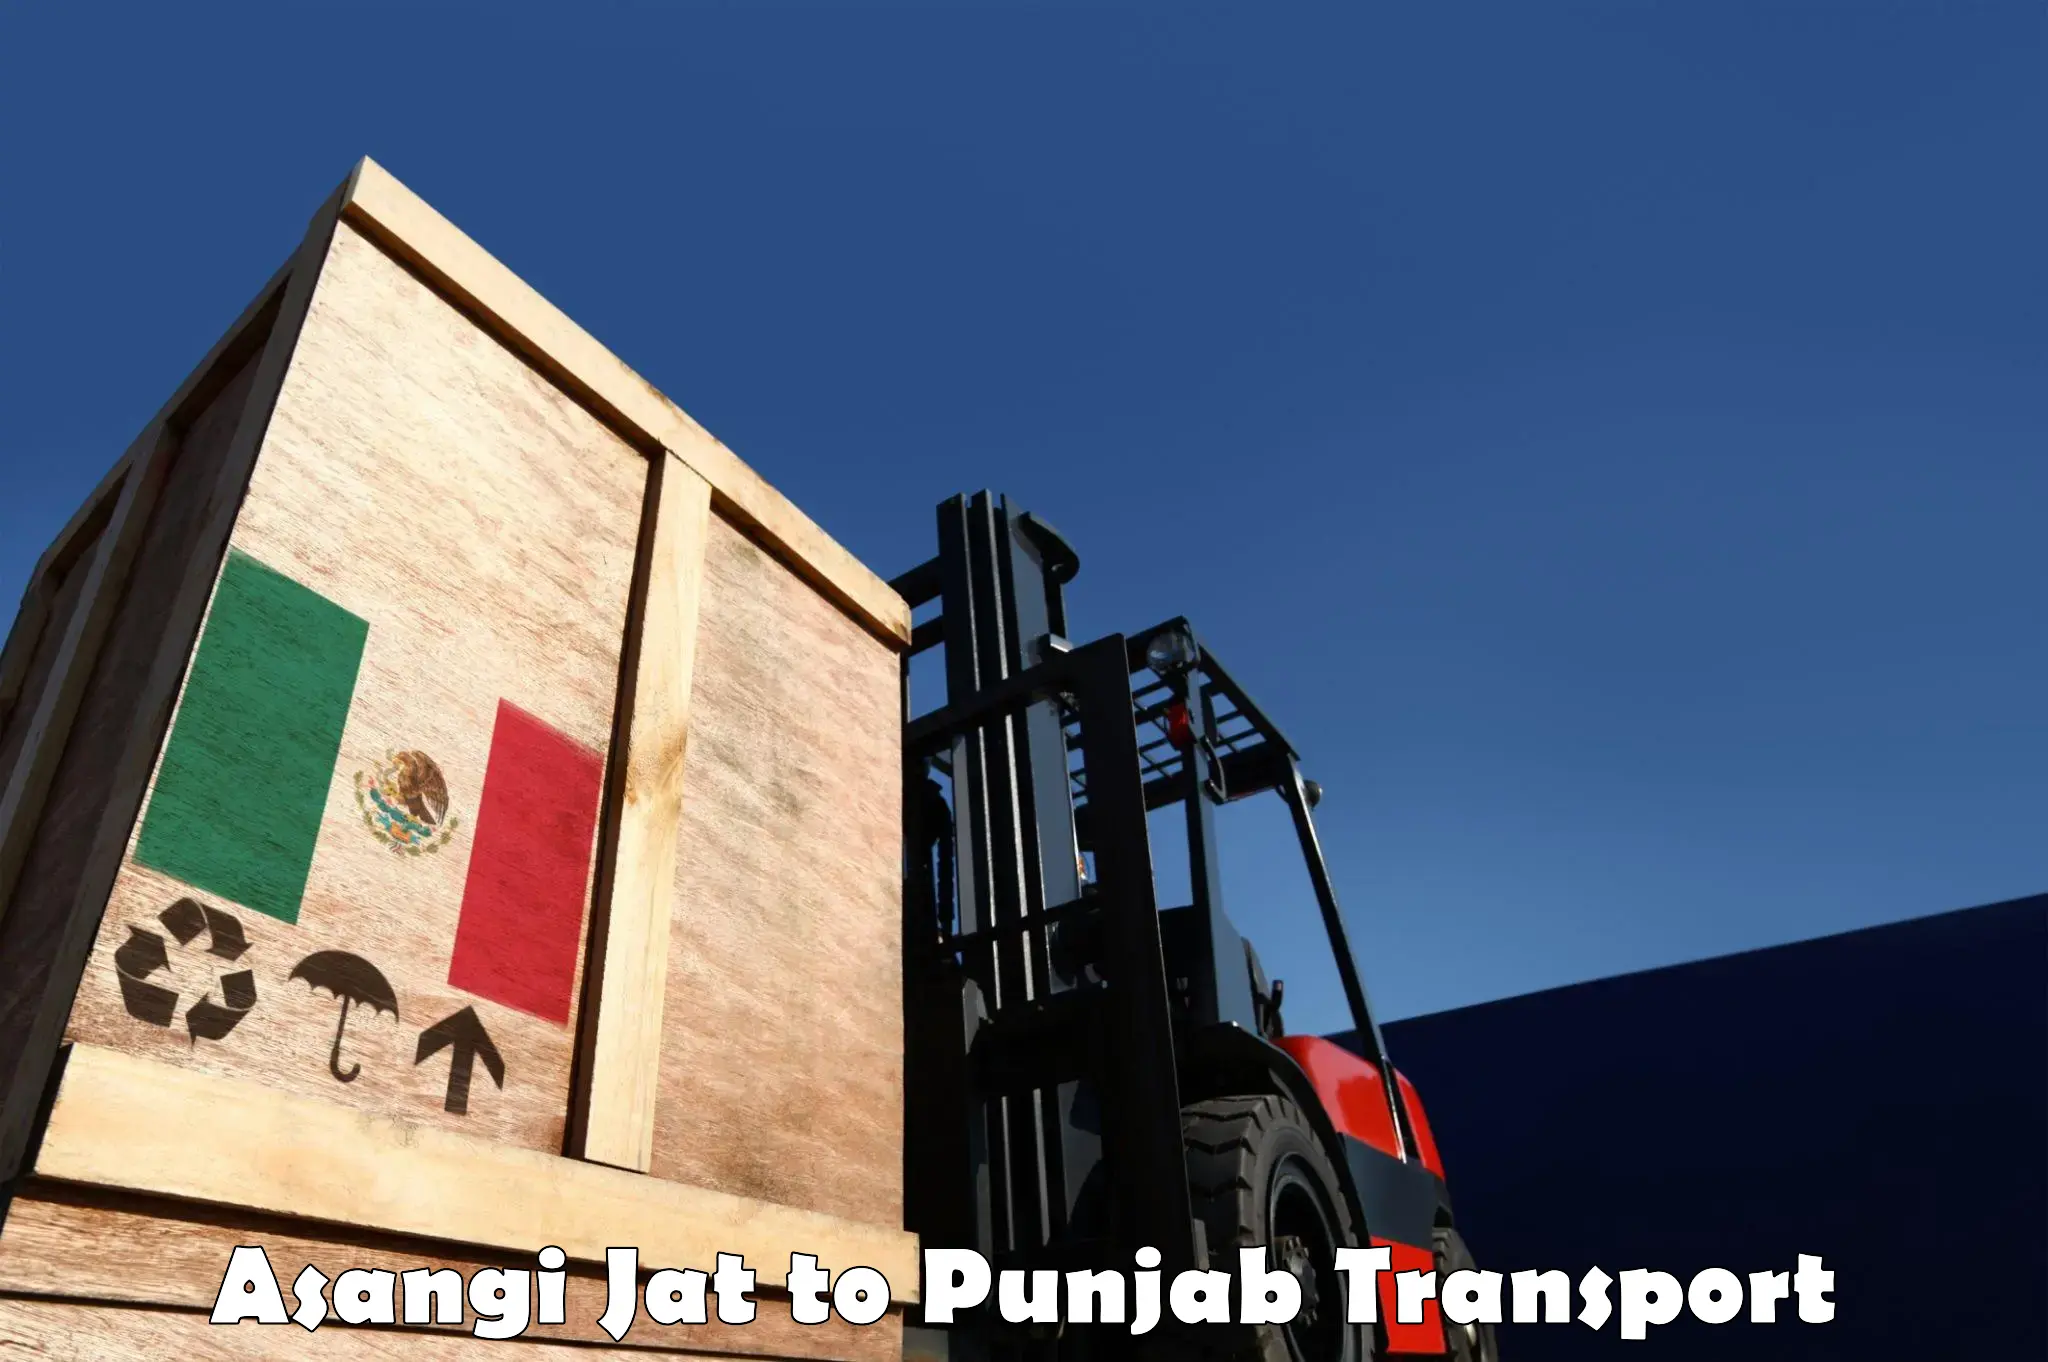 Material transport services in Asangi Jat to Mohali